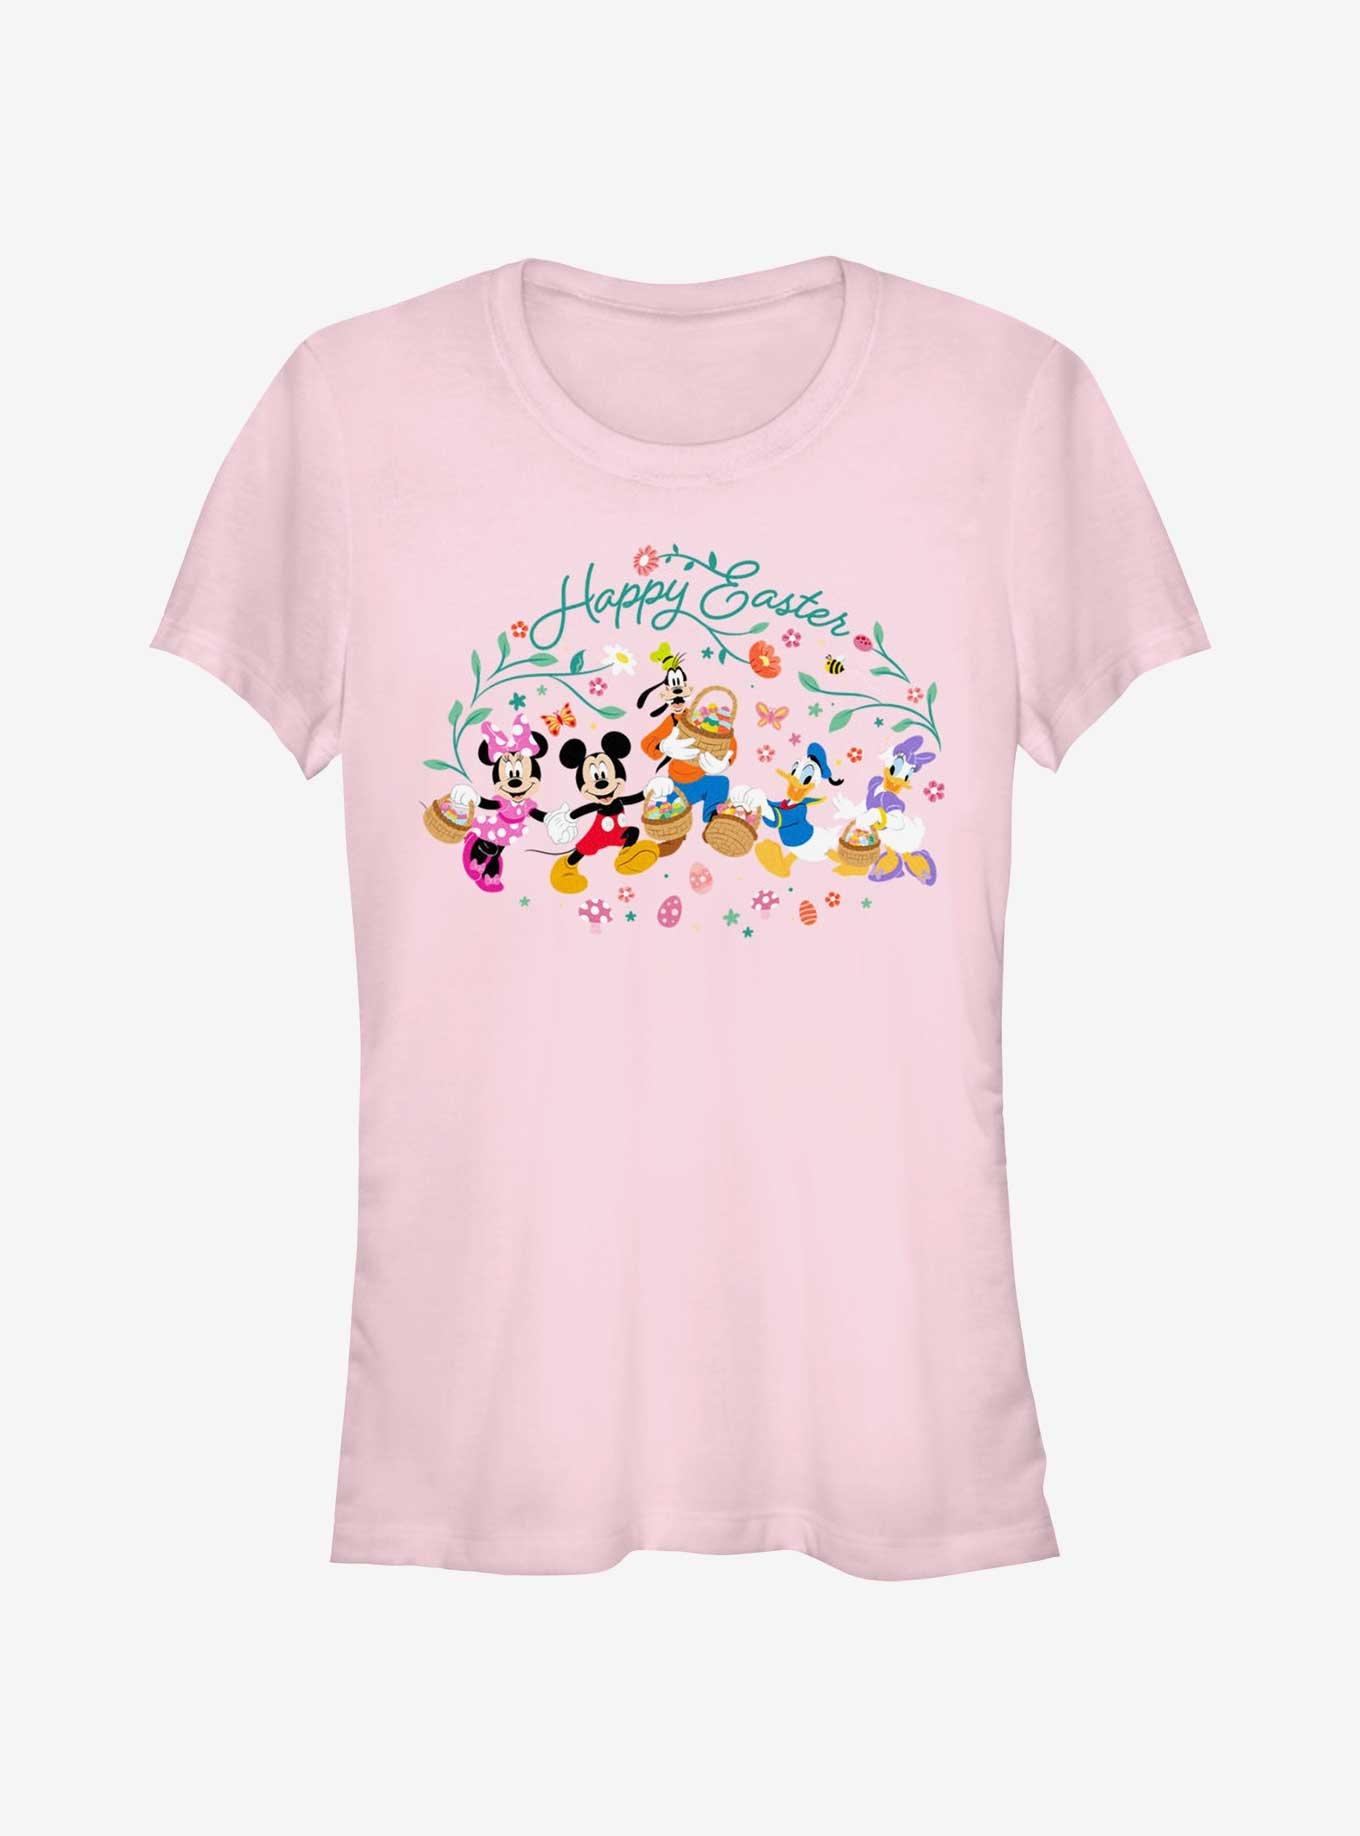 Disney Mickey Mouse & Friends Happy Easter Girls T-Shirt, LIGHT PINK, hi-res